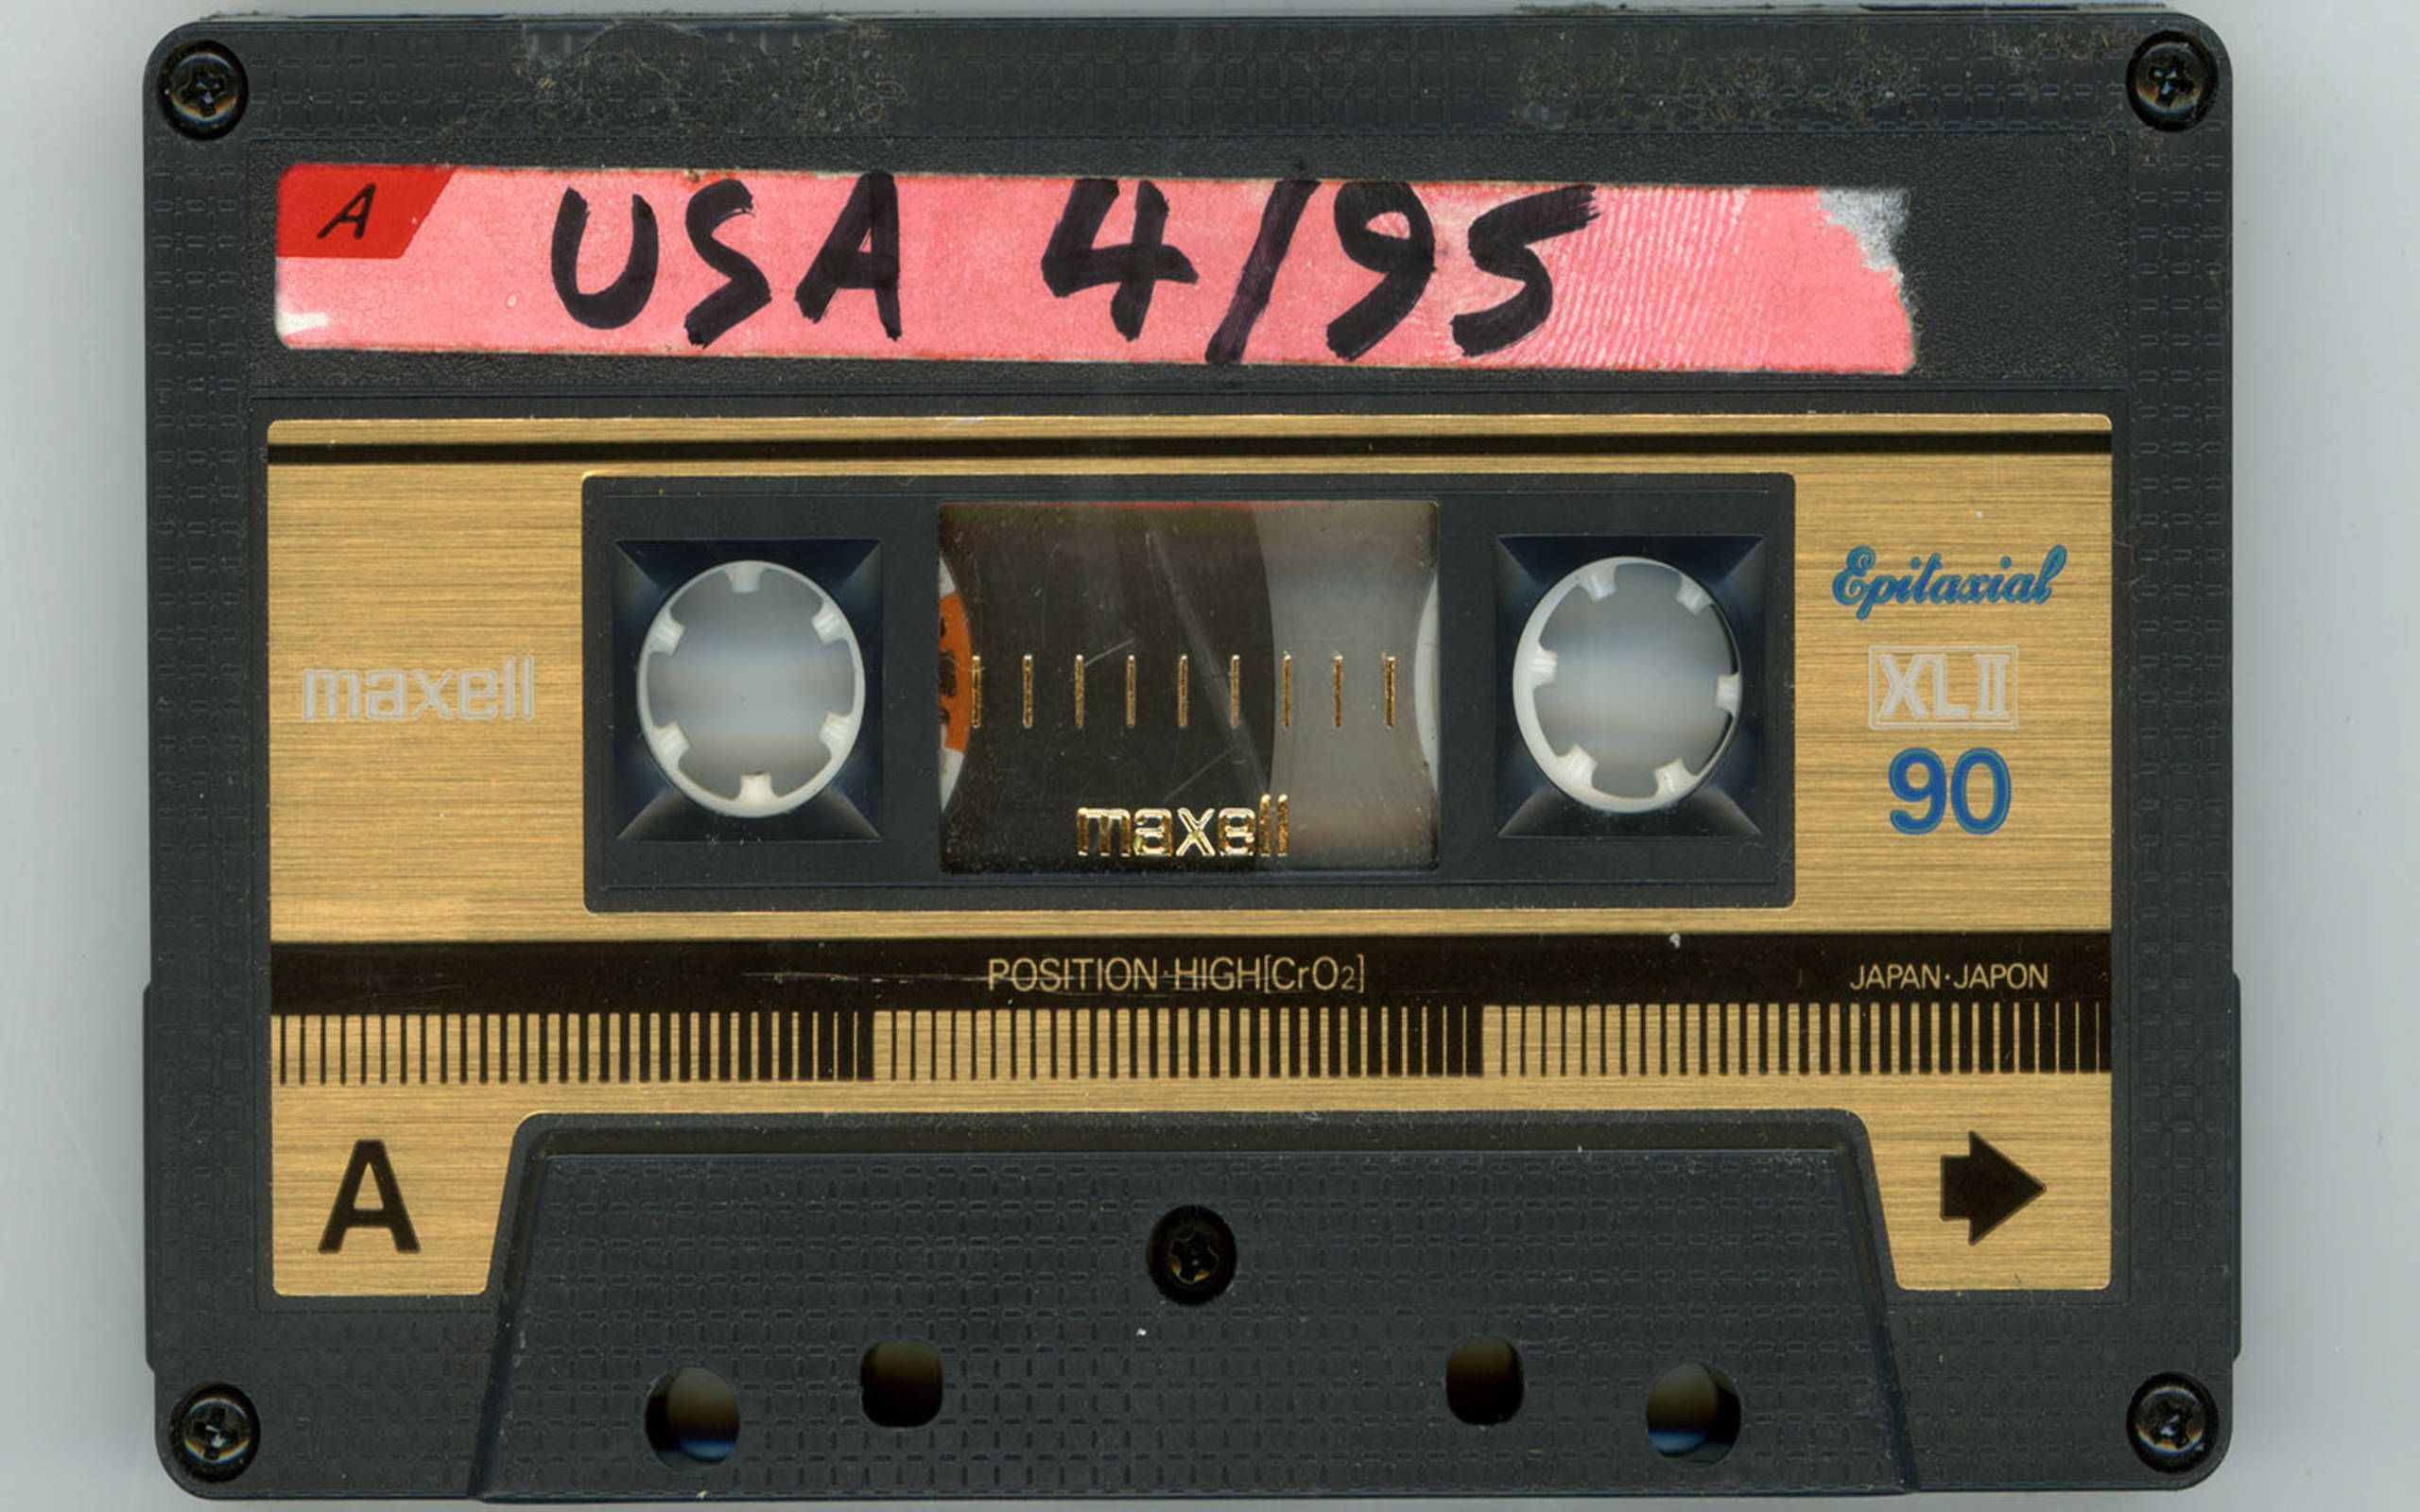 Exactly 20 years ago, my greatest mix tape circumnavigated the USA